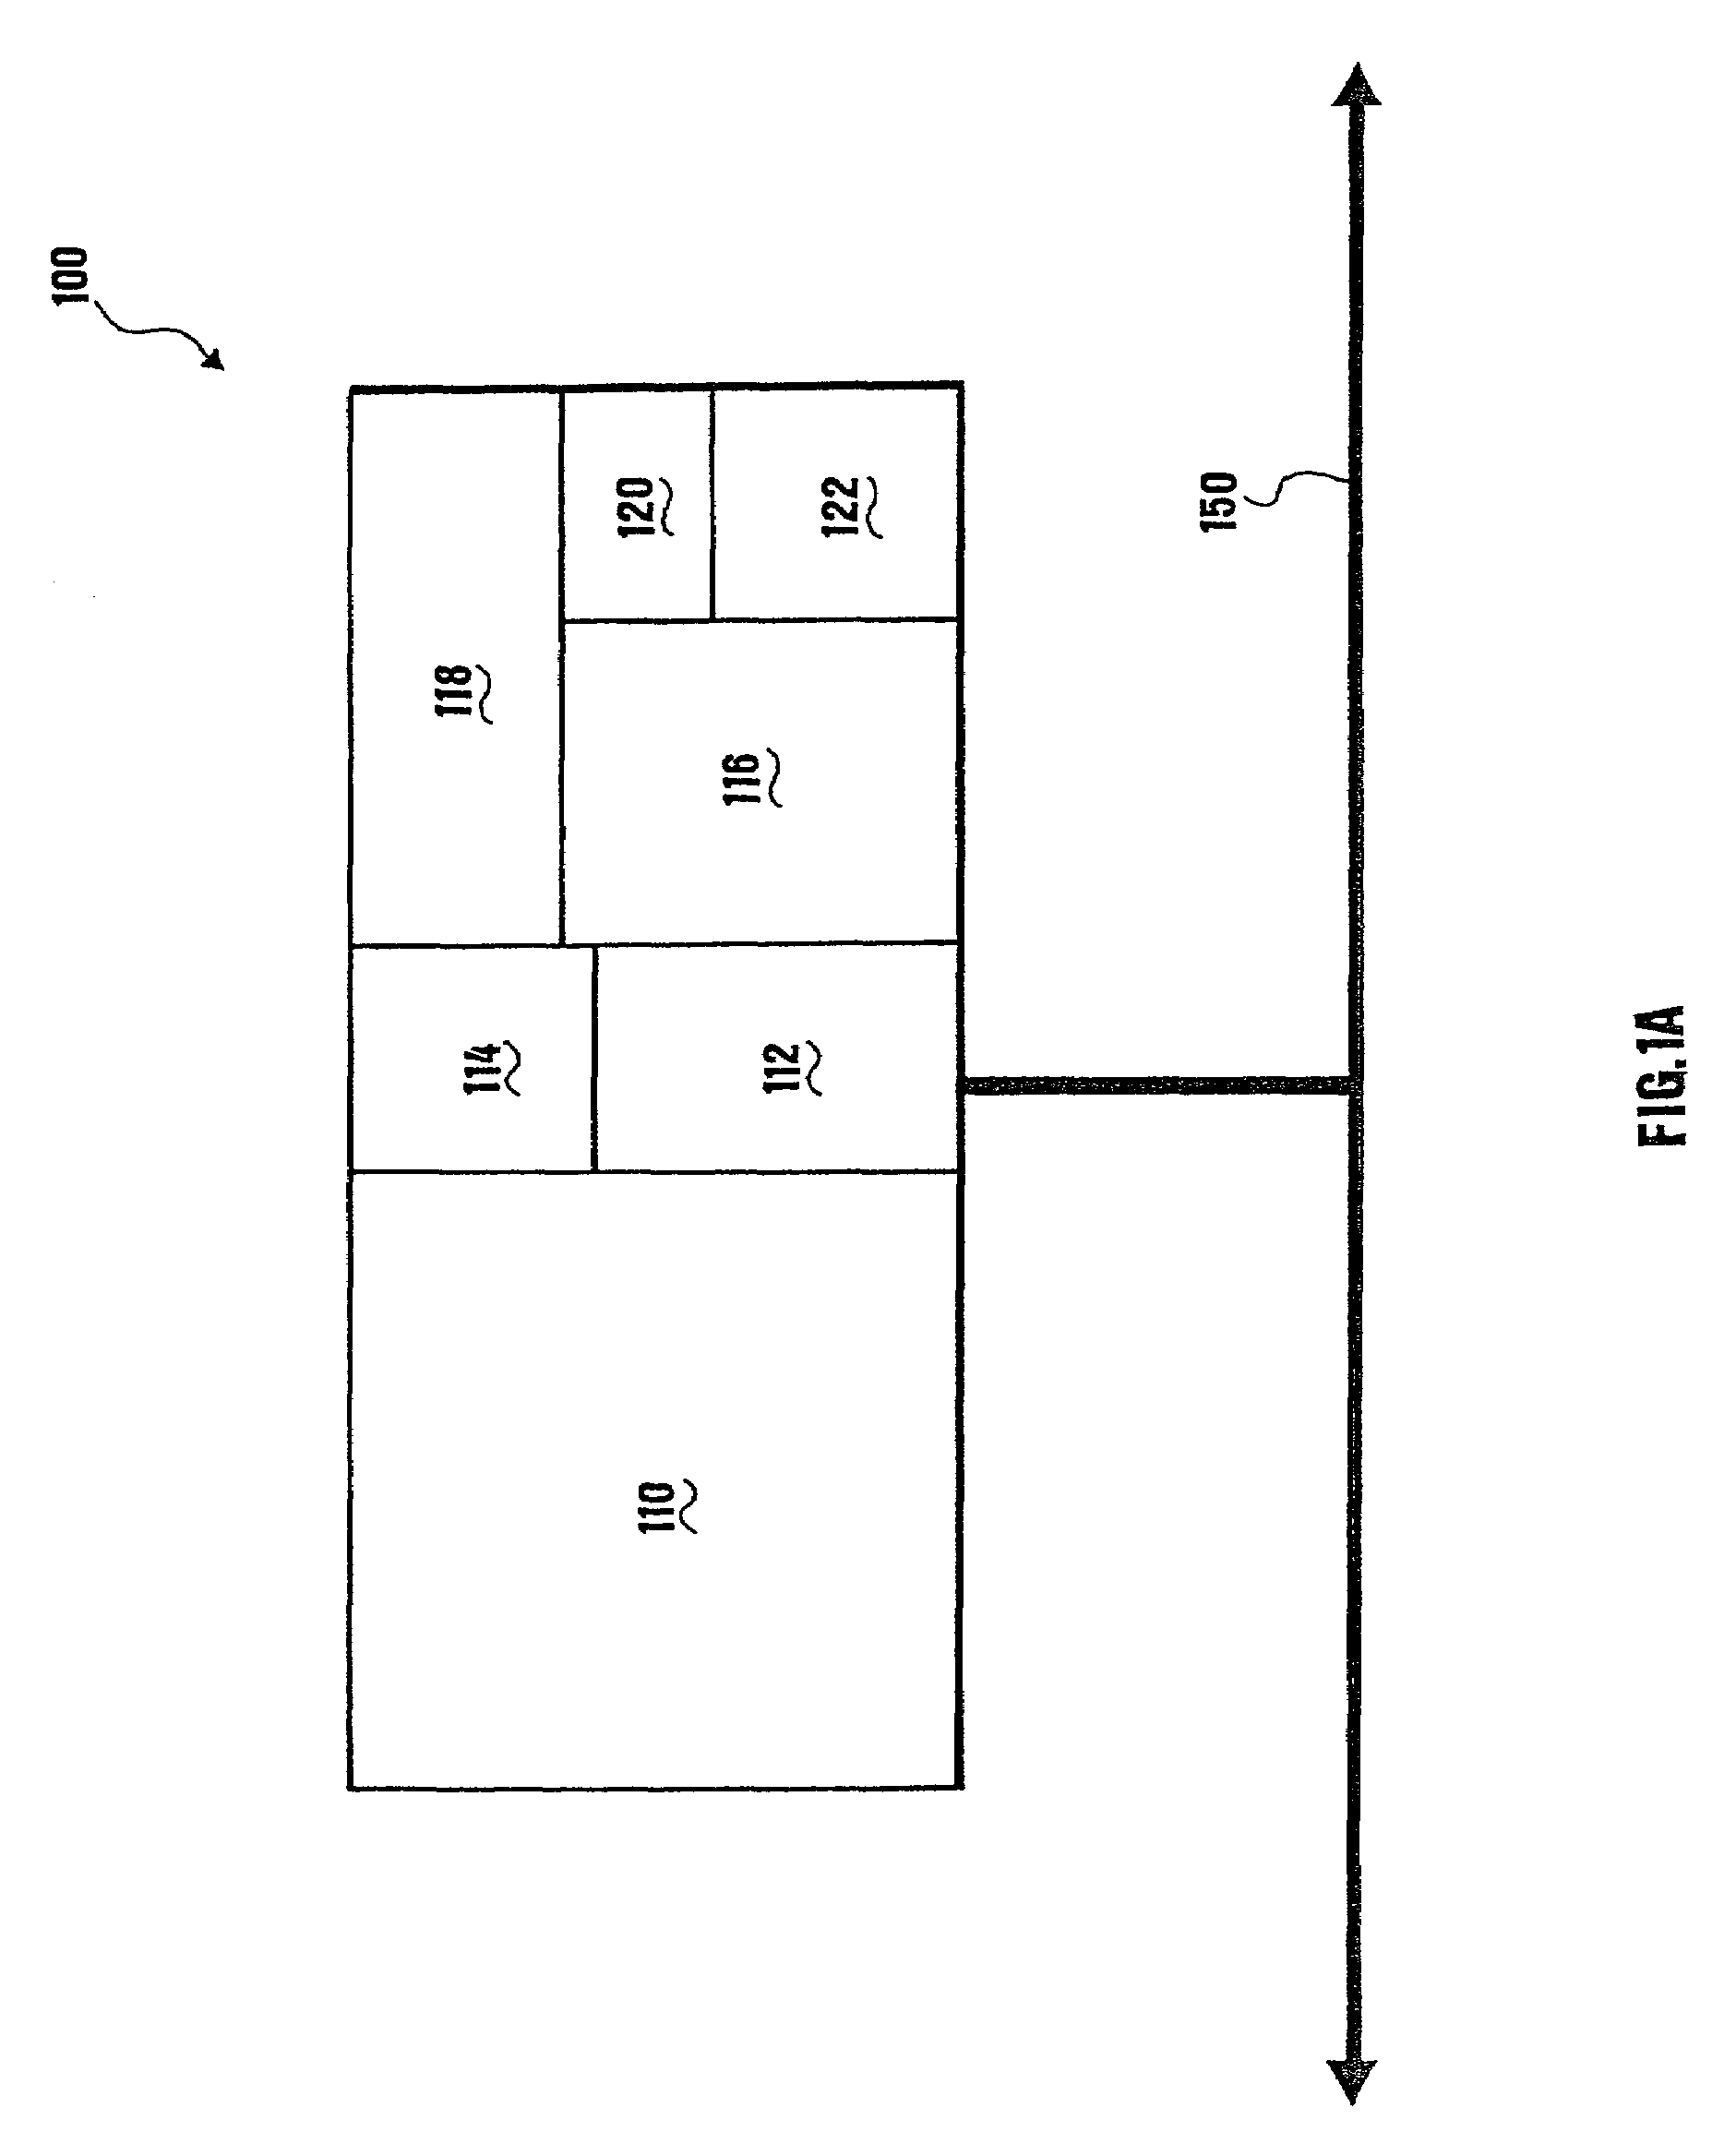 Logic and memory device integration